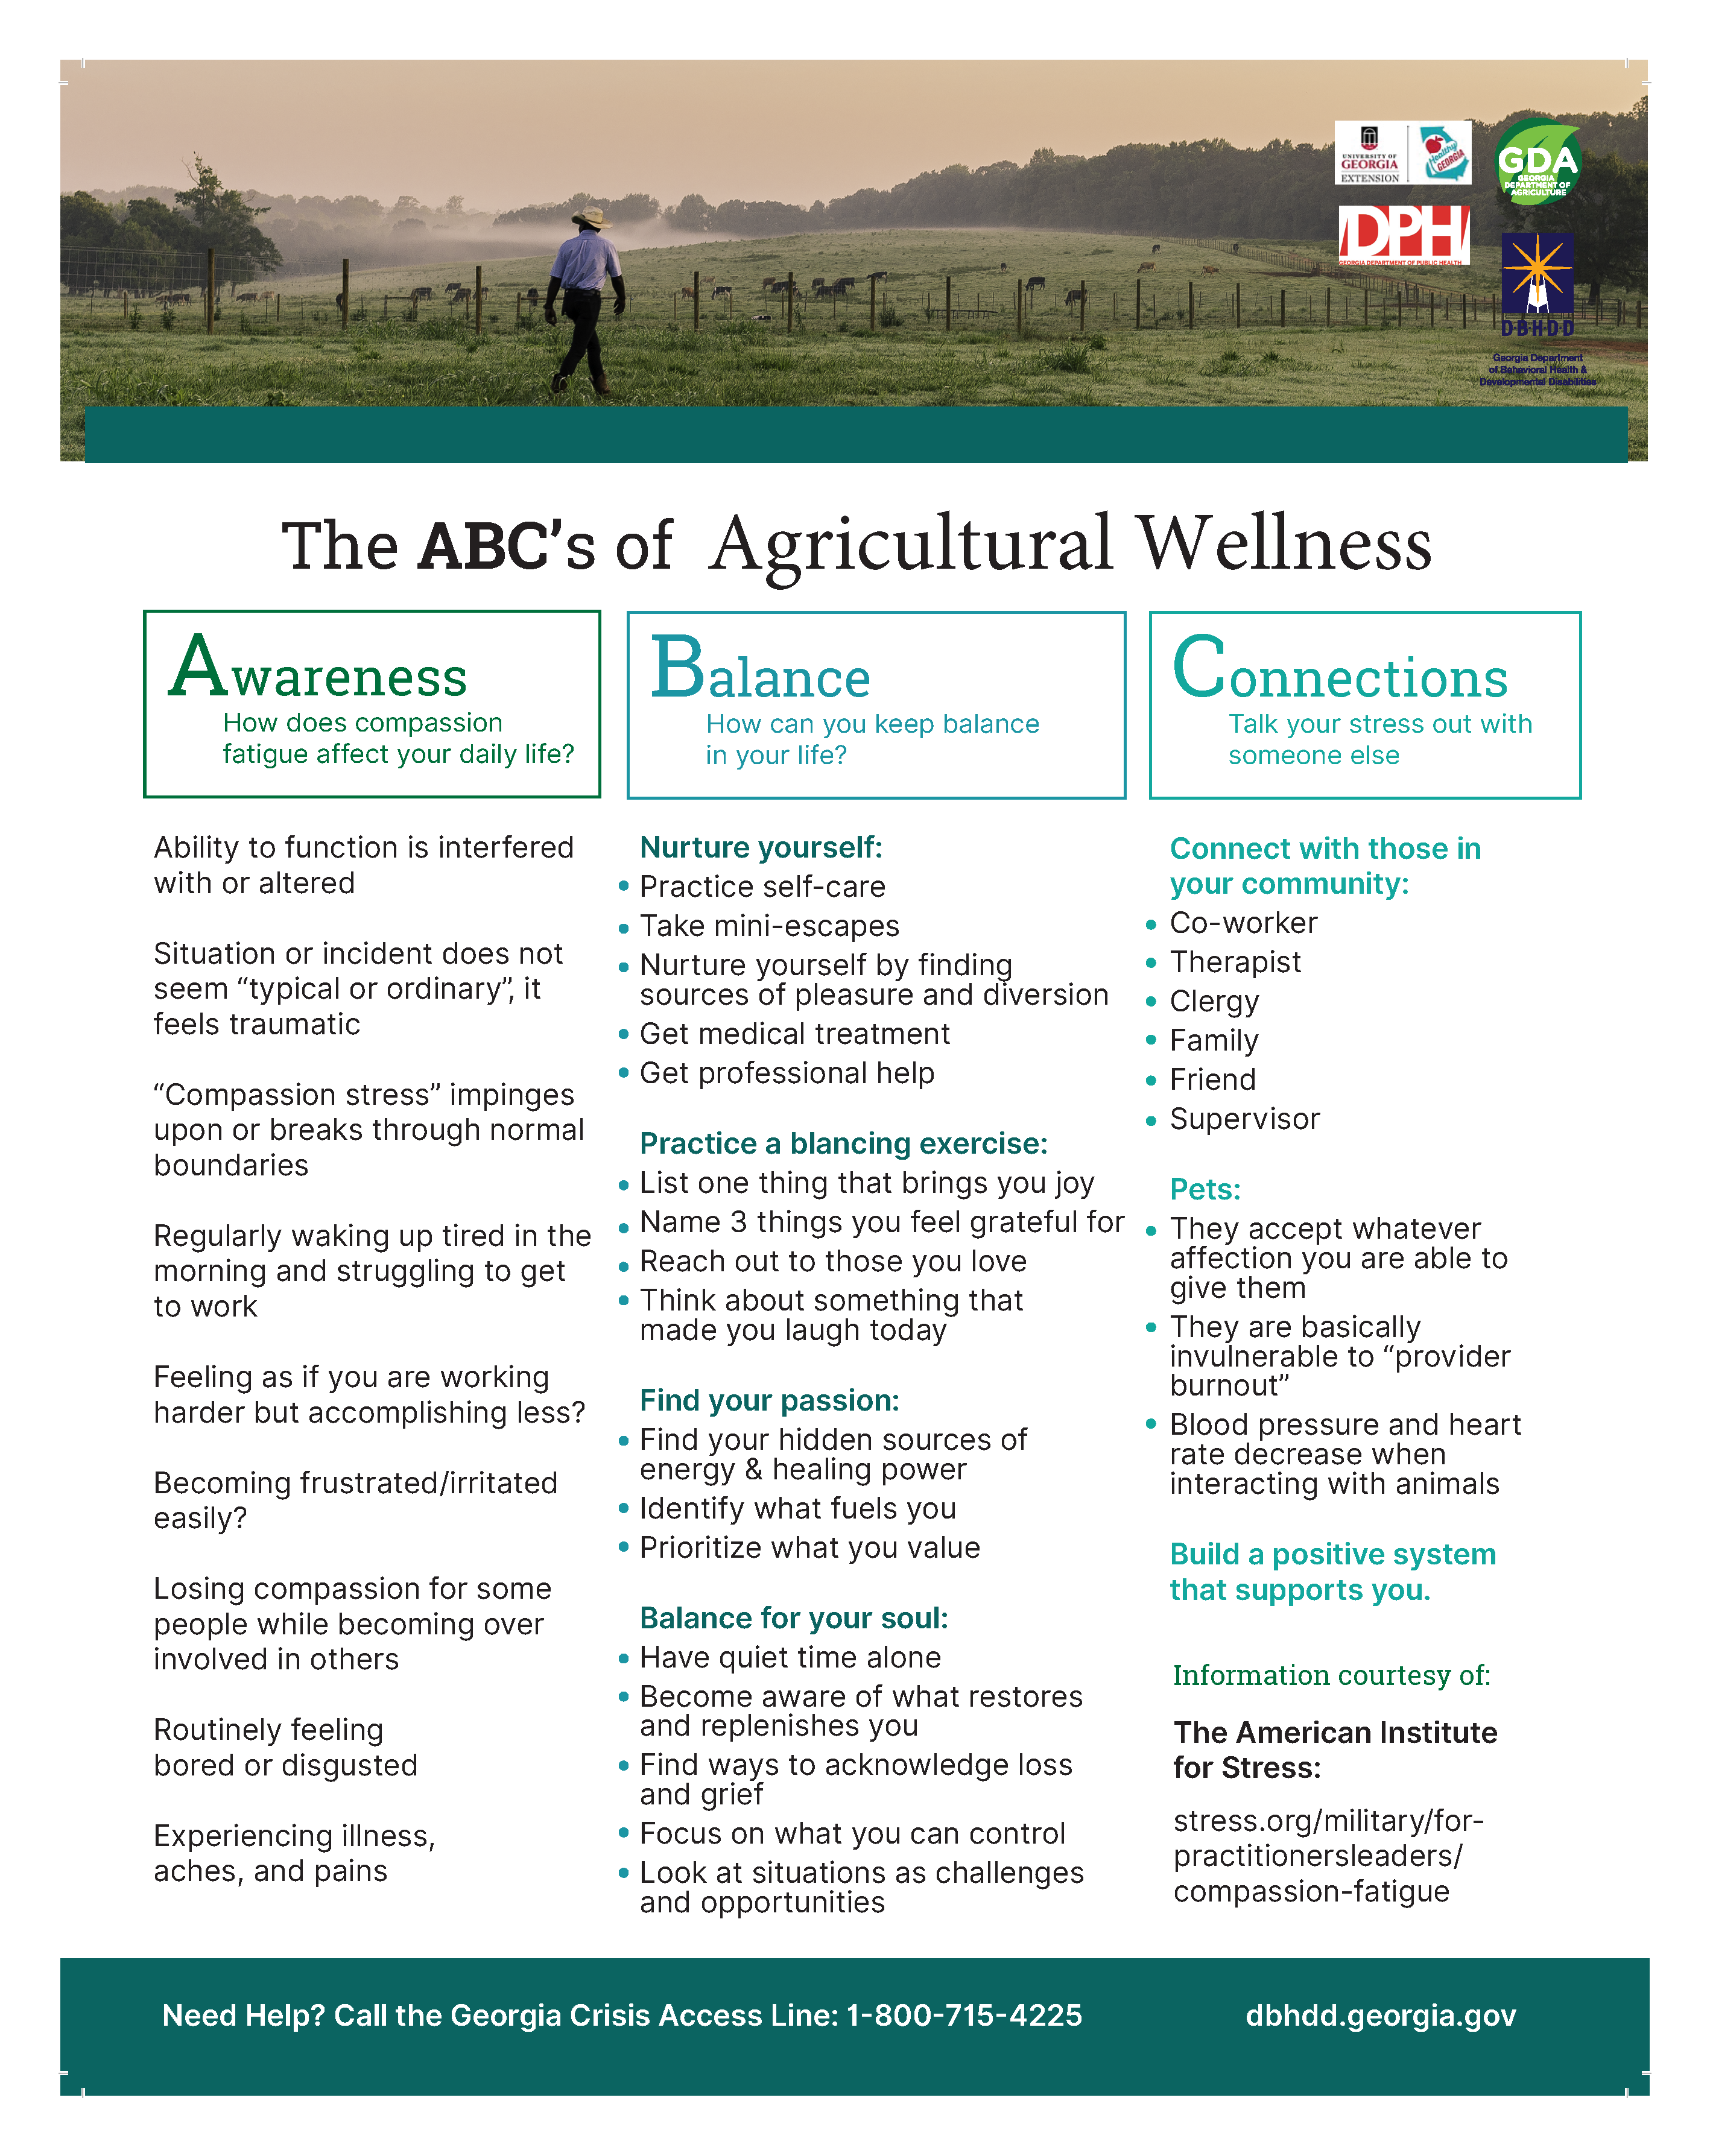 The ABC’s of Agricultural Wellness